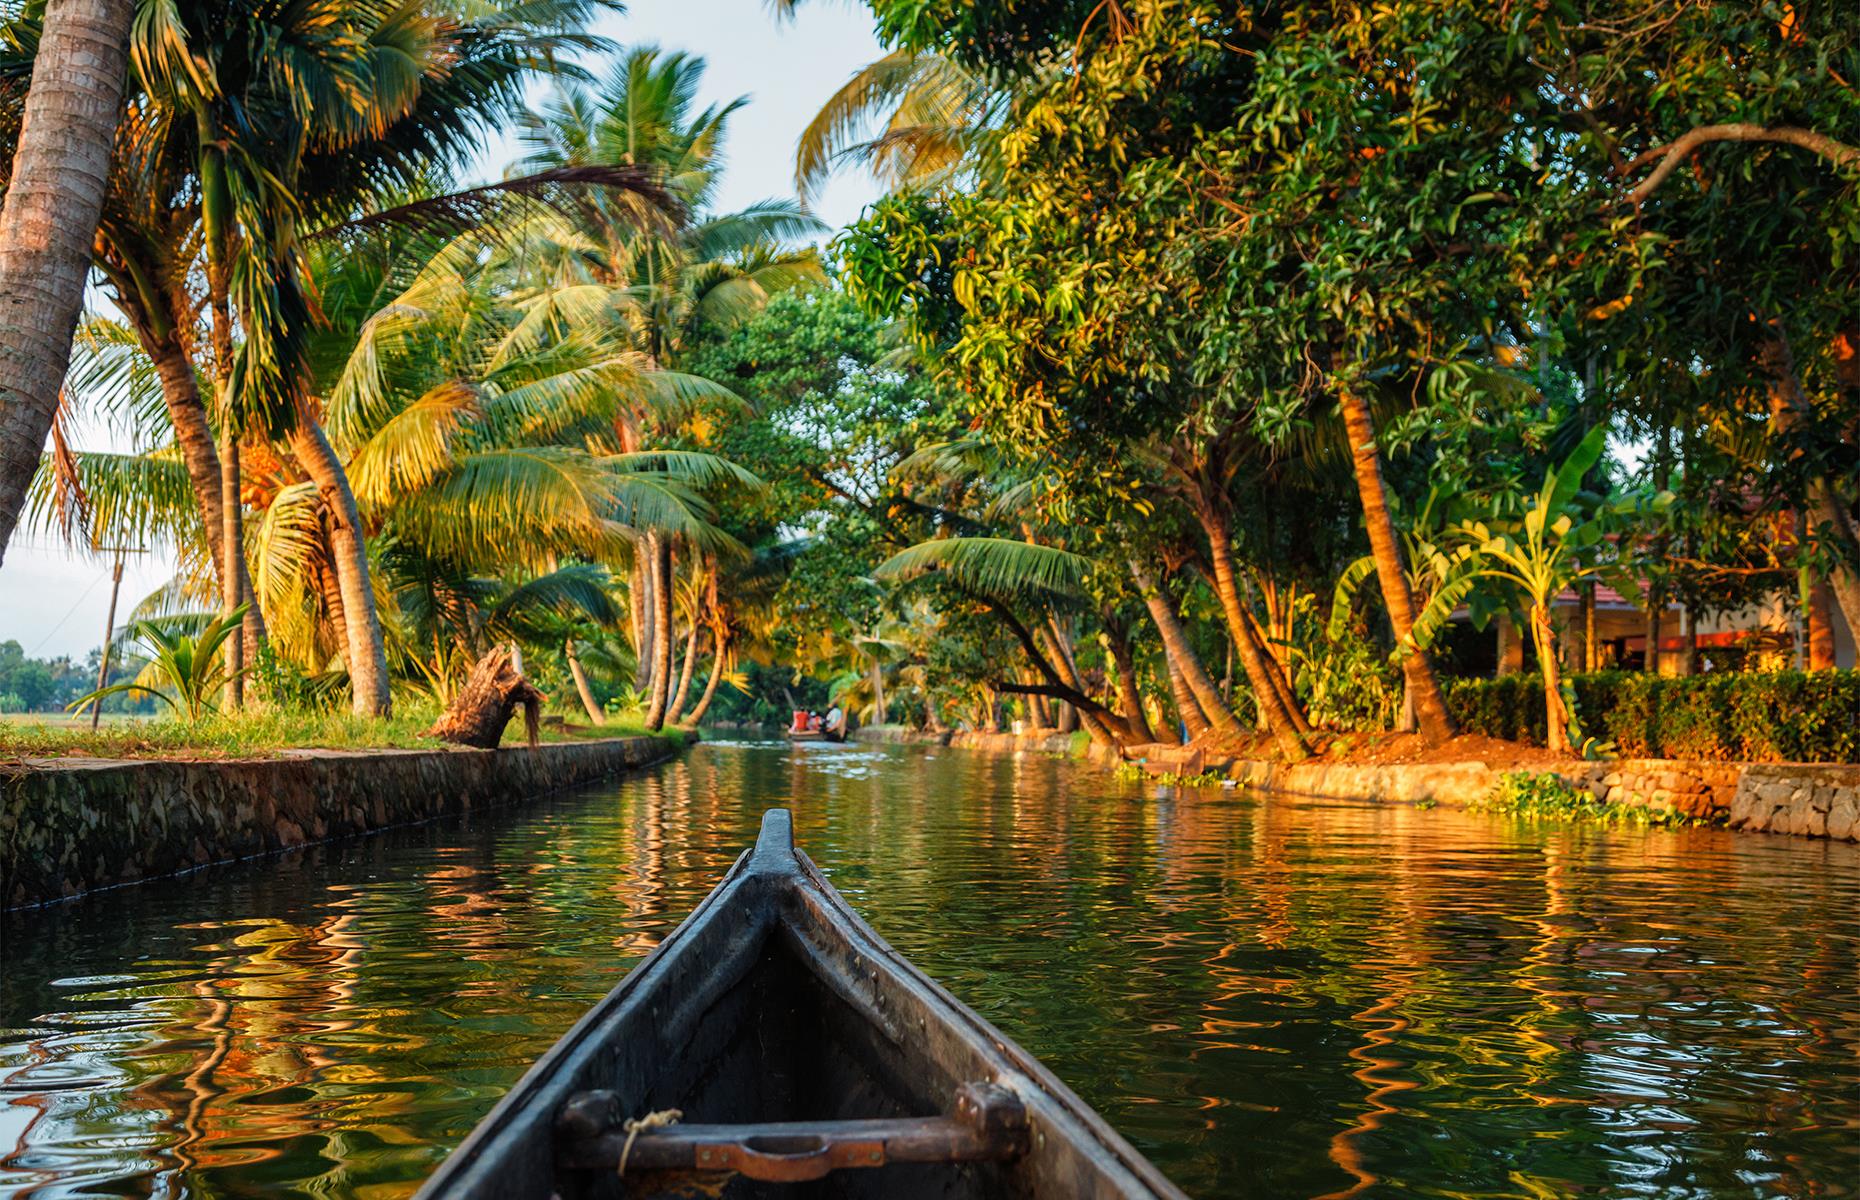 <p>Between the beaches and the highlands of the South Indian state of Kerala lies a verdant region criss-crossed by waterways and dotted with traditional villages. A boat trip, either for an afternoon or for several days, will let you soak up the views and catch a glimpse of rural Keralan life.</p>  <p><a href="https://www.facebook.com/loveexploringUK/"><strong>Follow us on Facebook for more travel inspiration</strong></a></p>